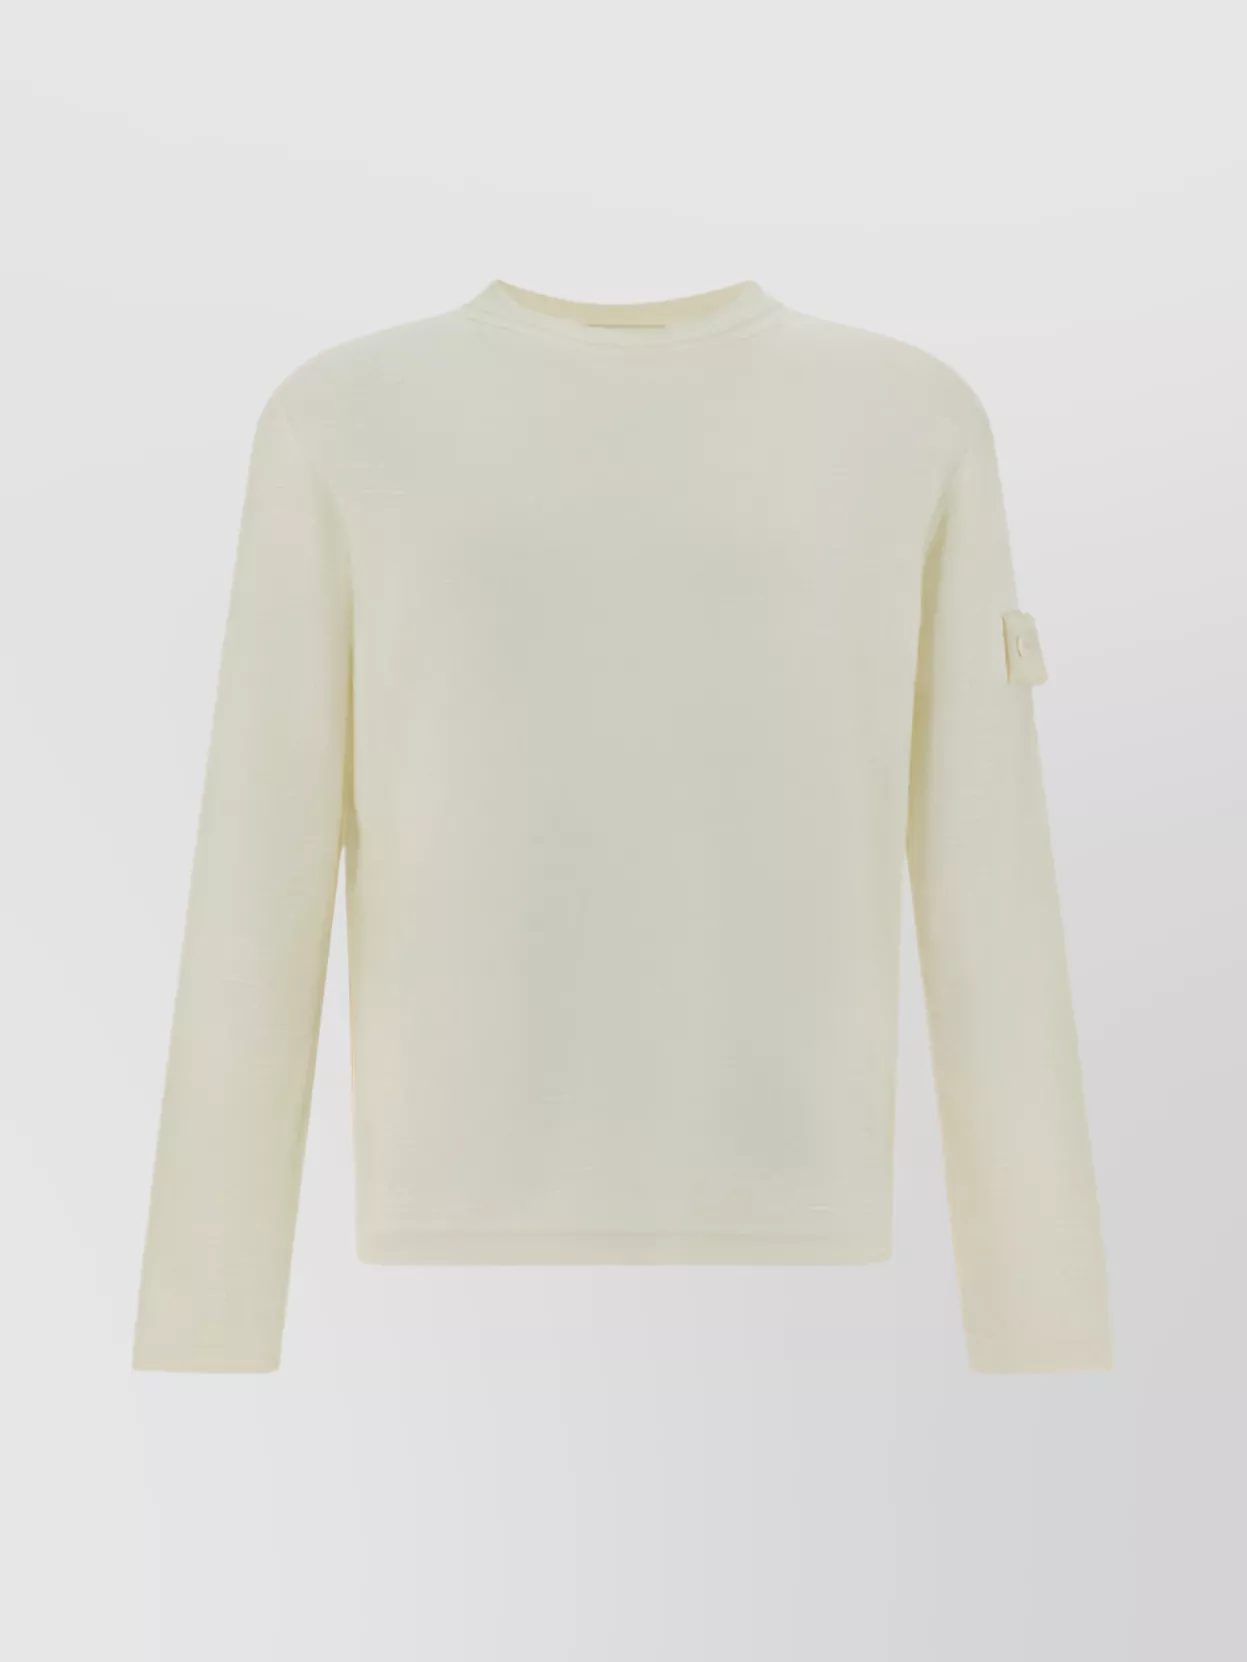 Stone Island Sleeve Button Detail Cotton Sweater In Neutral